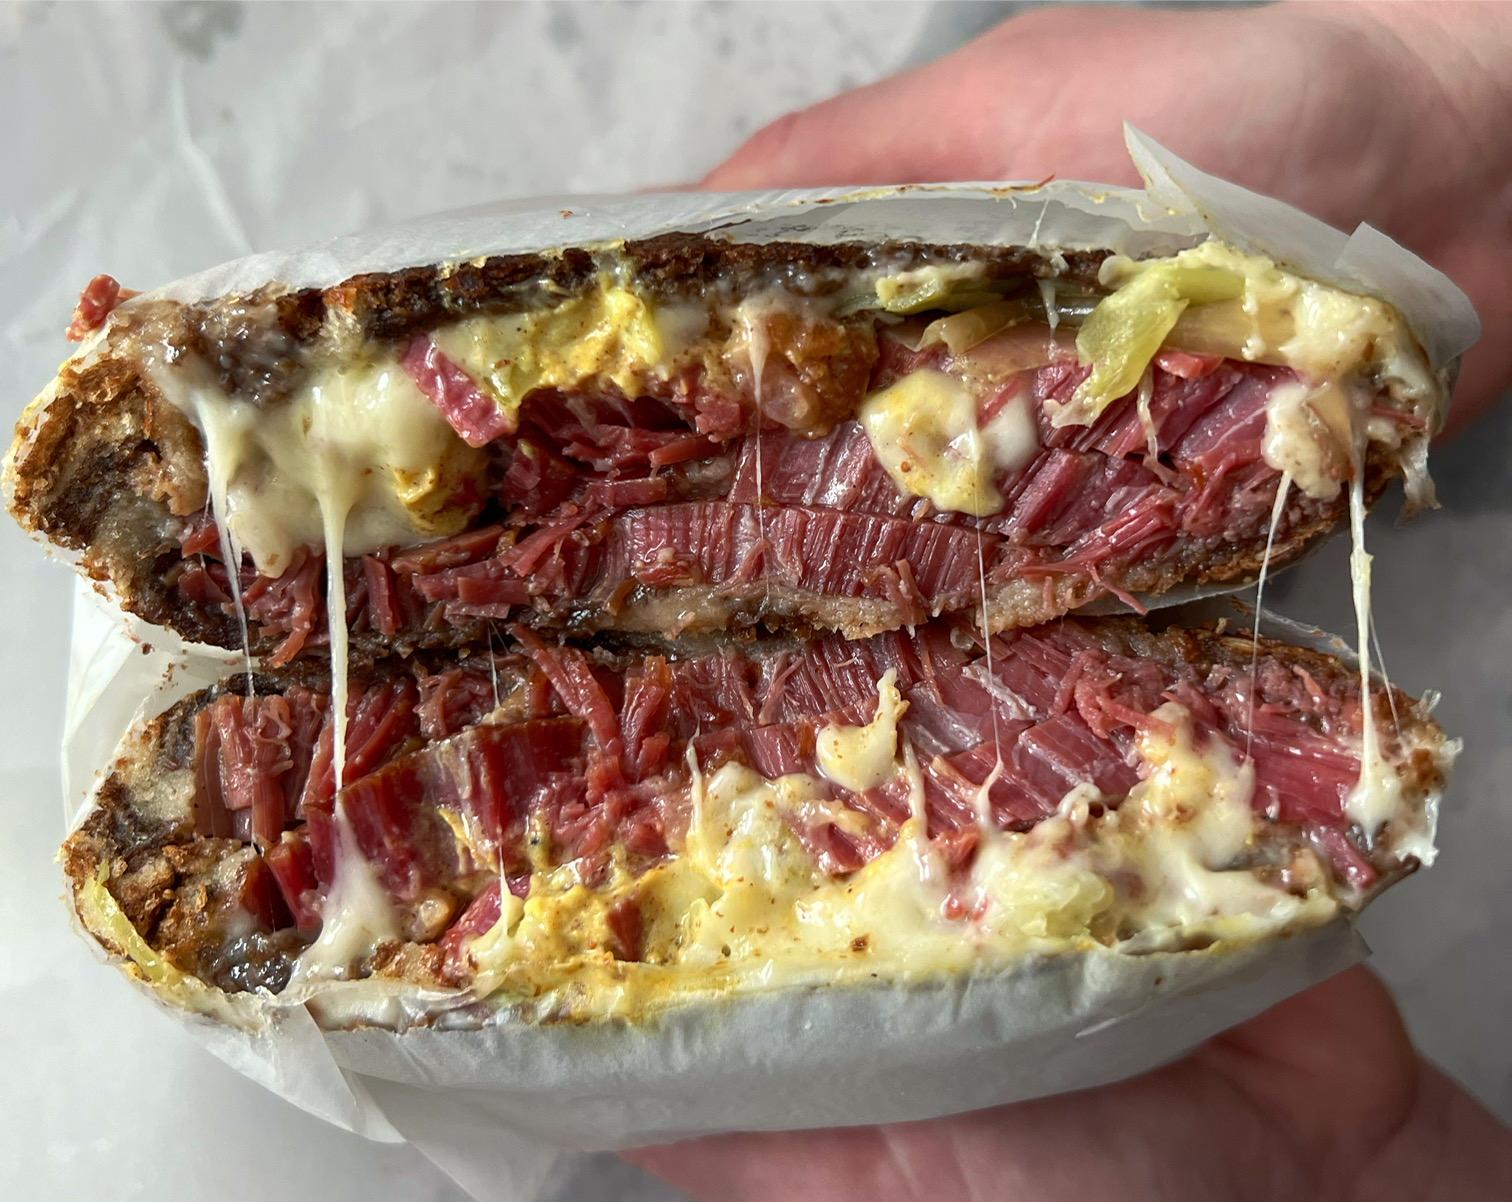 Two white hands hold a sliced pastrami sandwich from Baldarotta's. The baby Swiss cheese strings across red pastrami. Photo by Alyssa Buckley.